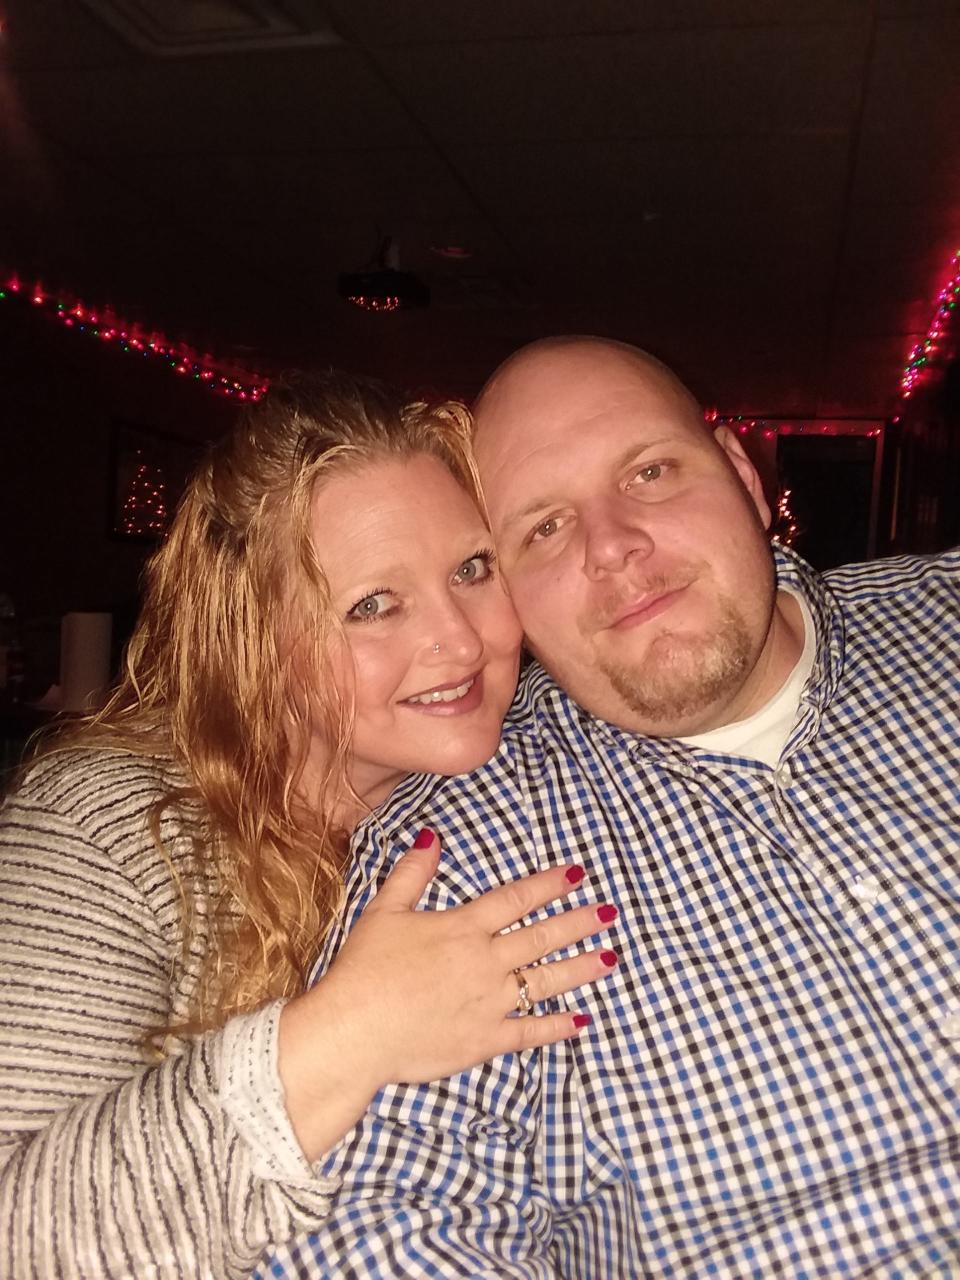 Jeremiah Shane Fields, who died at Holston Valley Medical Center in 2019, is seen in an undated photo with his fiancee, Jennifer Tyus.